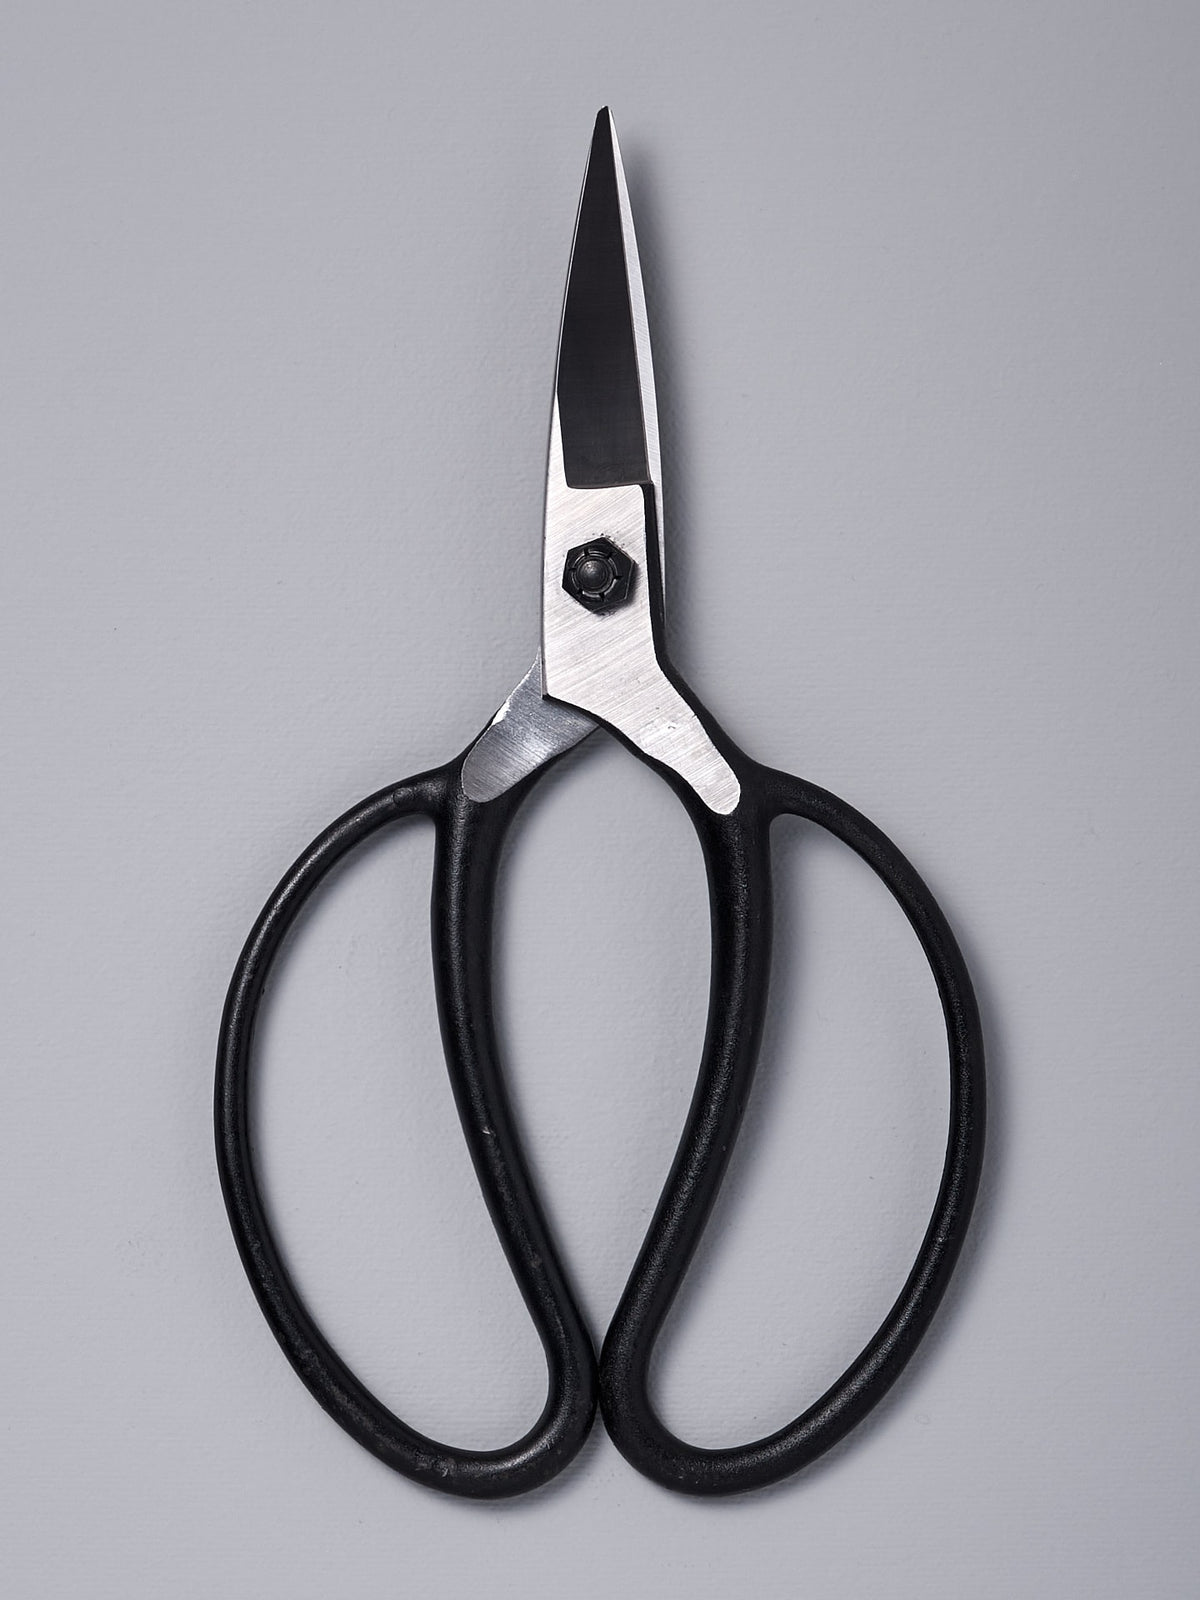 A pair of Okatsune Garden Scissors №203 – Large on a gray background.